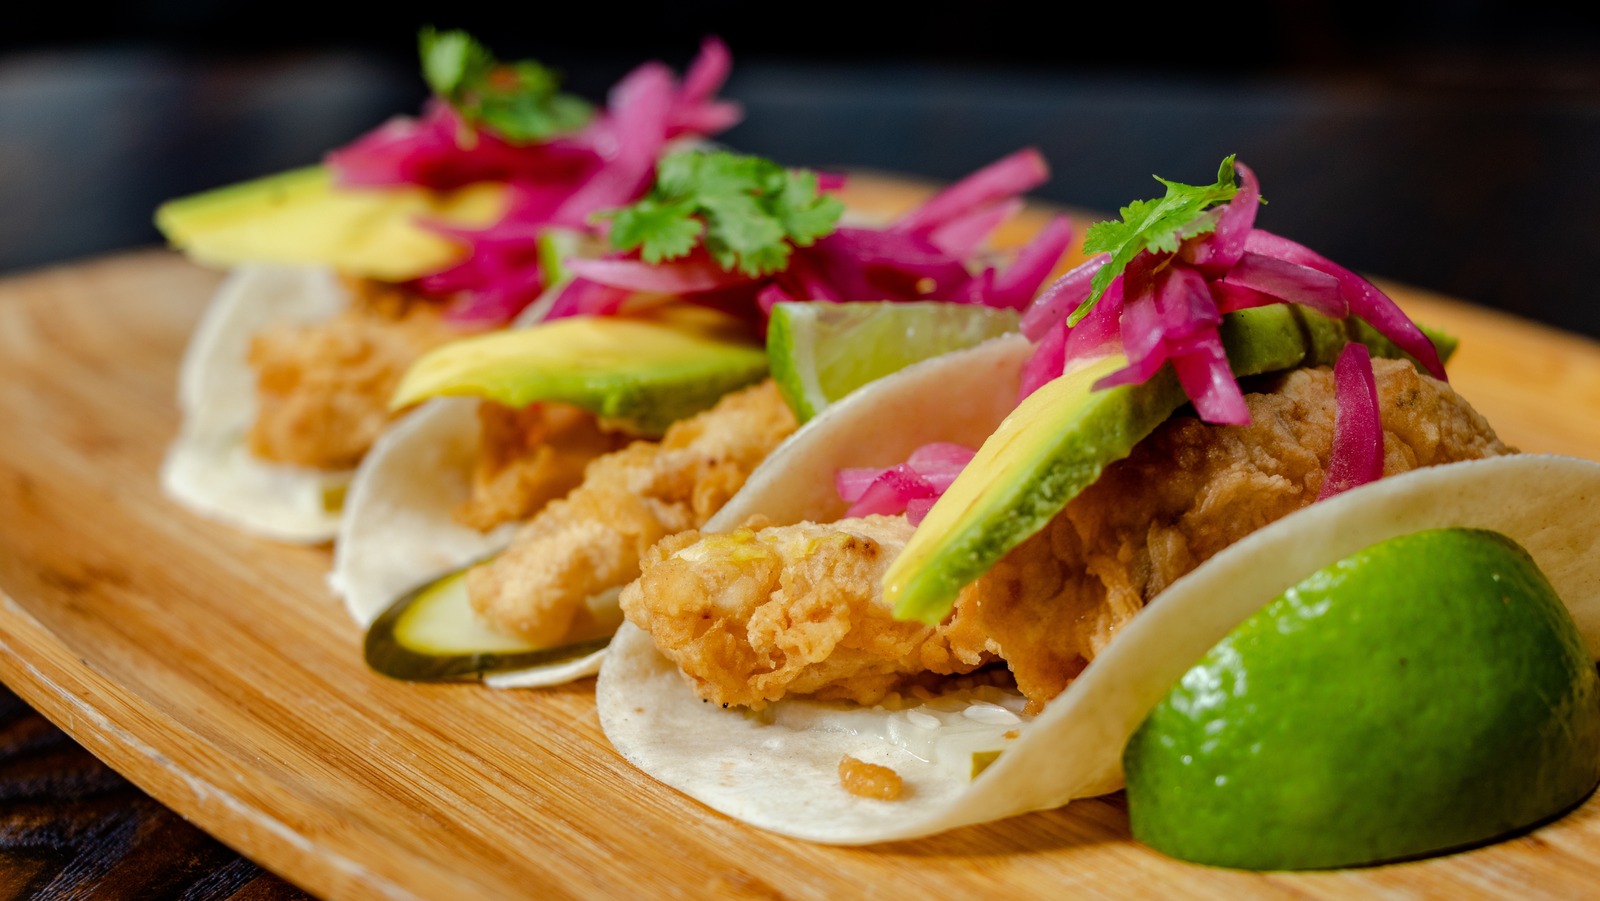 Sliced Avocado Is The Easy Way To Add Creamy Texture To Fish Tacos